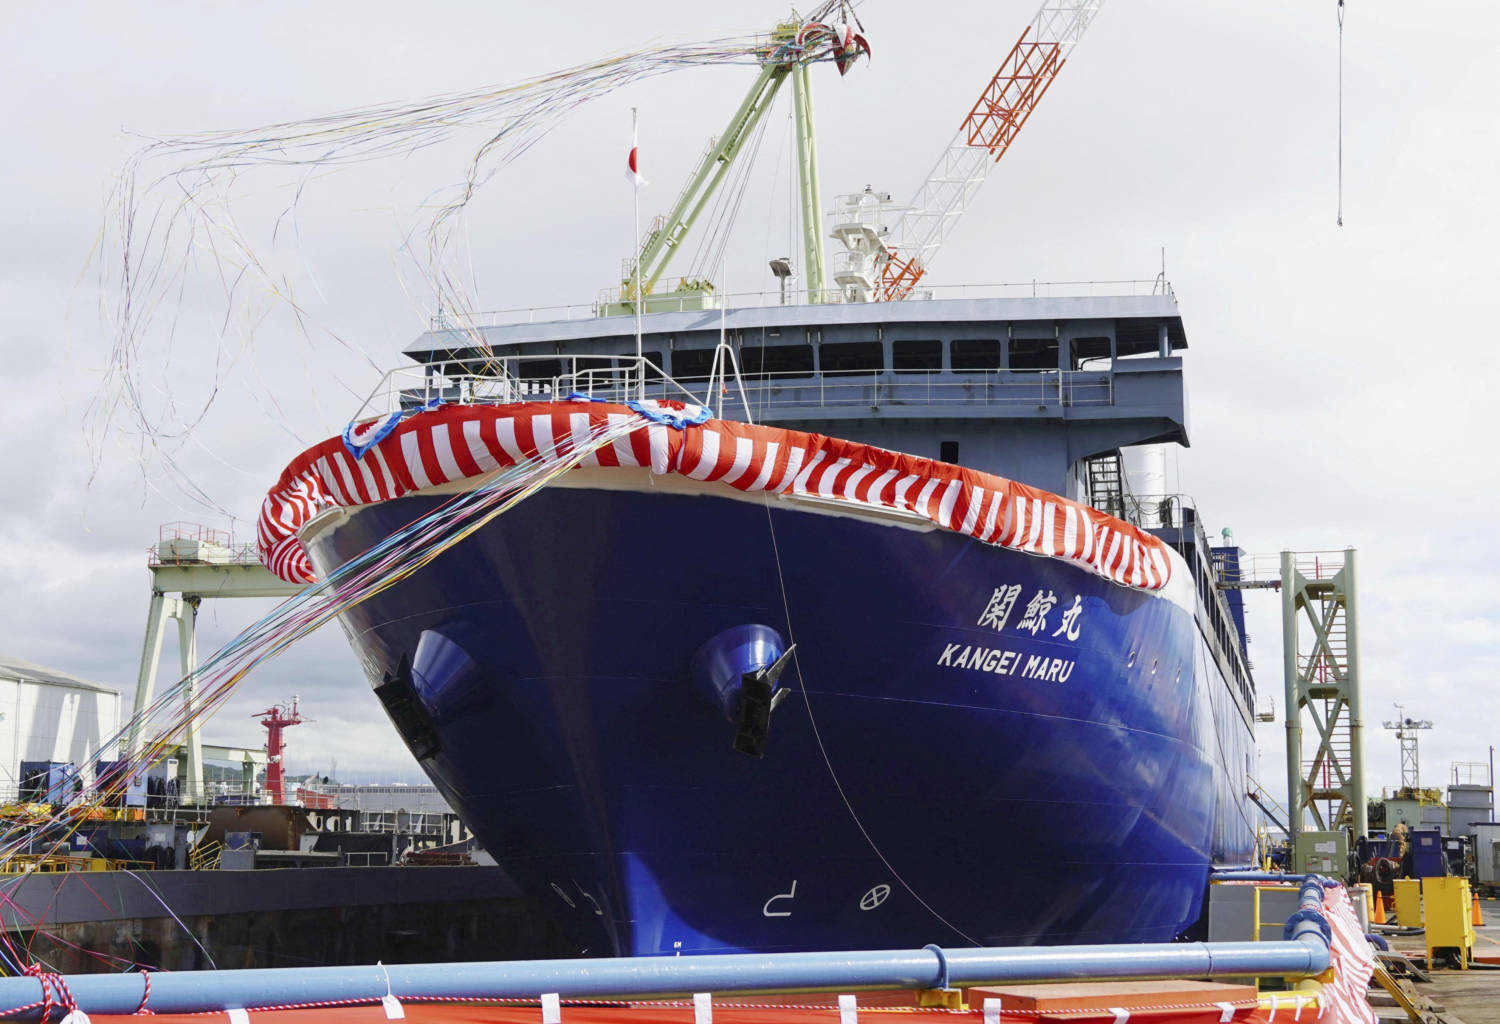 The Whaling Mother Ship Kangei Maru Is Seen During It's Launch Ceremony In Shimonoseki, Japan